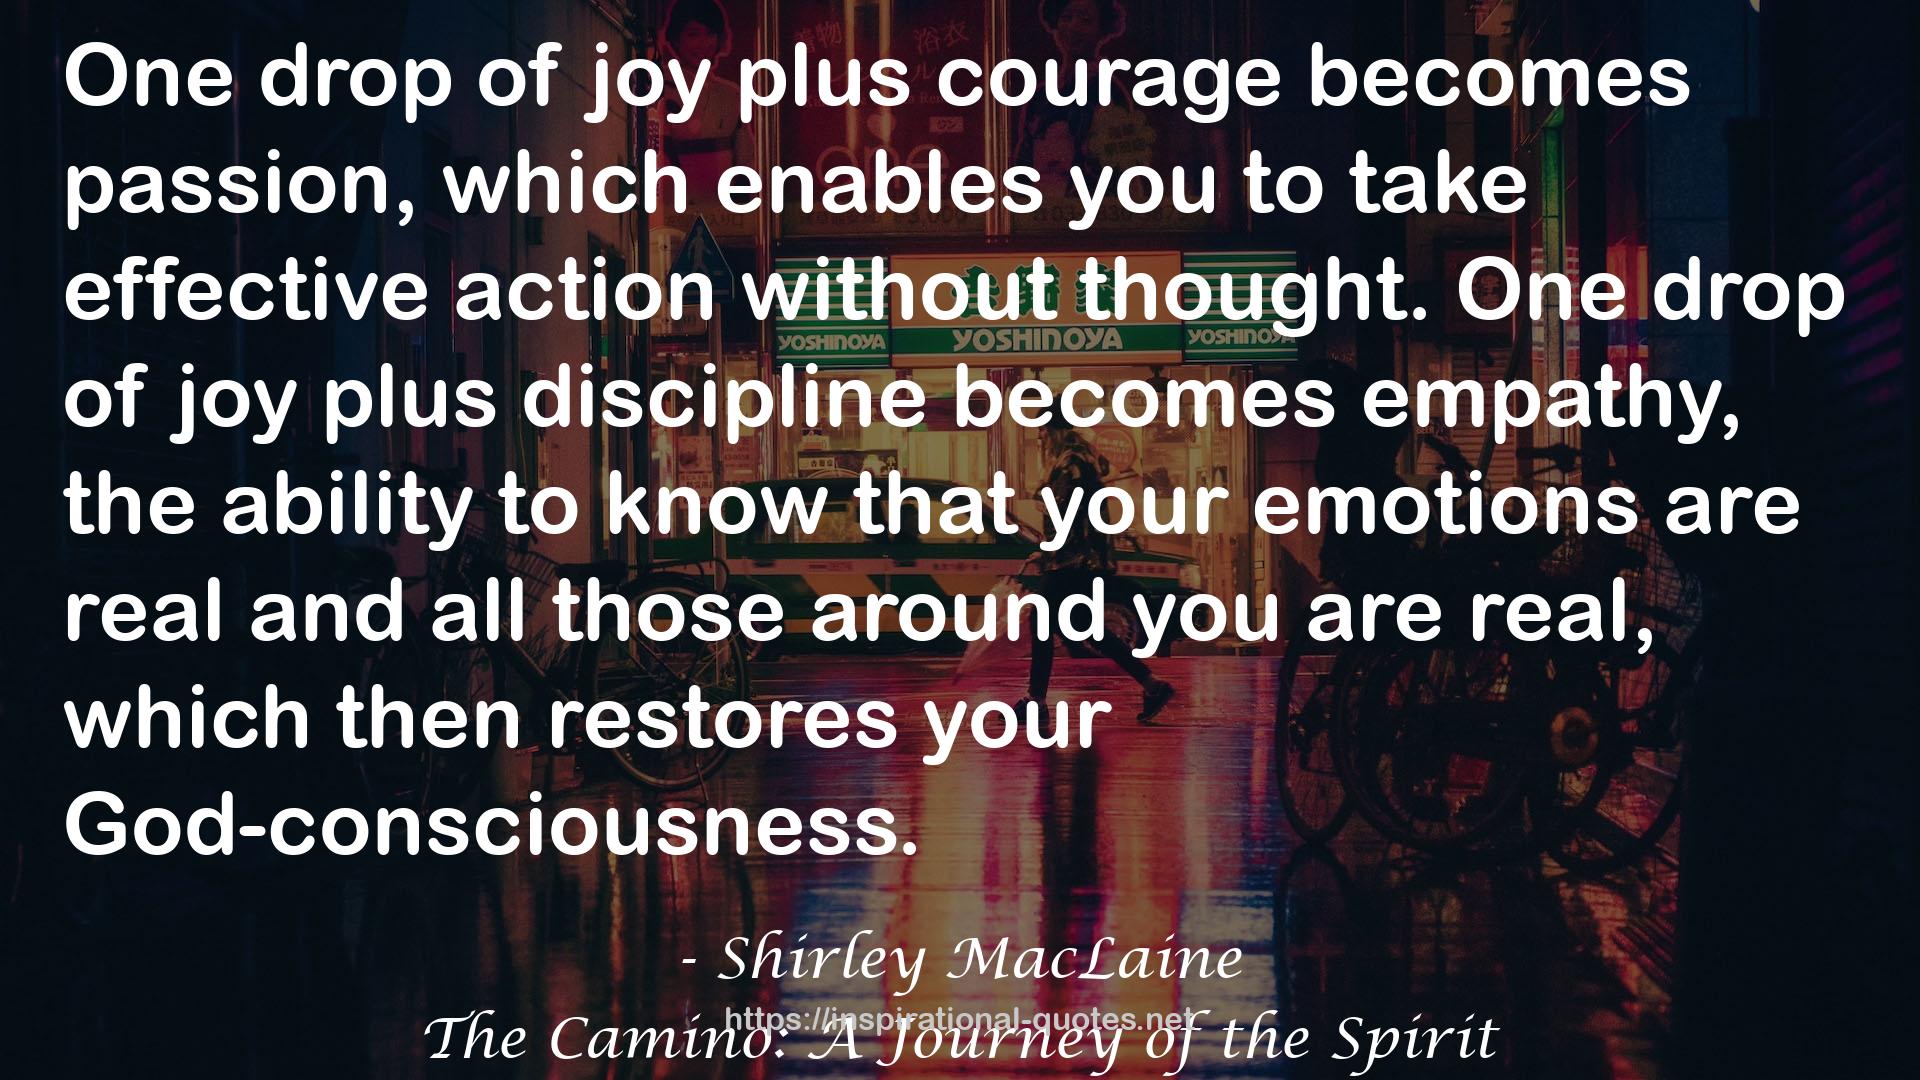 The Camino: A Journey of the Spirit QUOTES